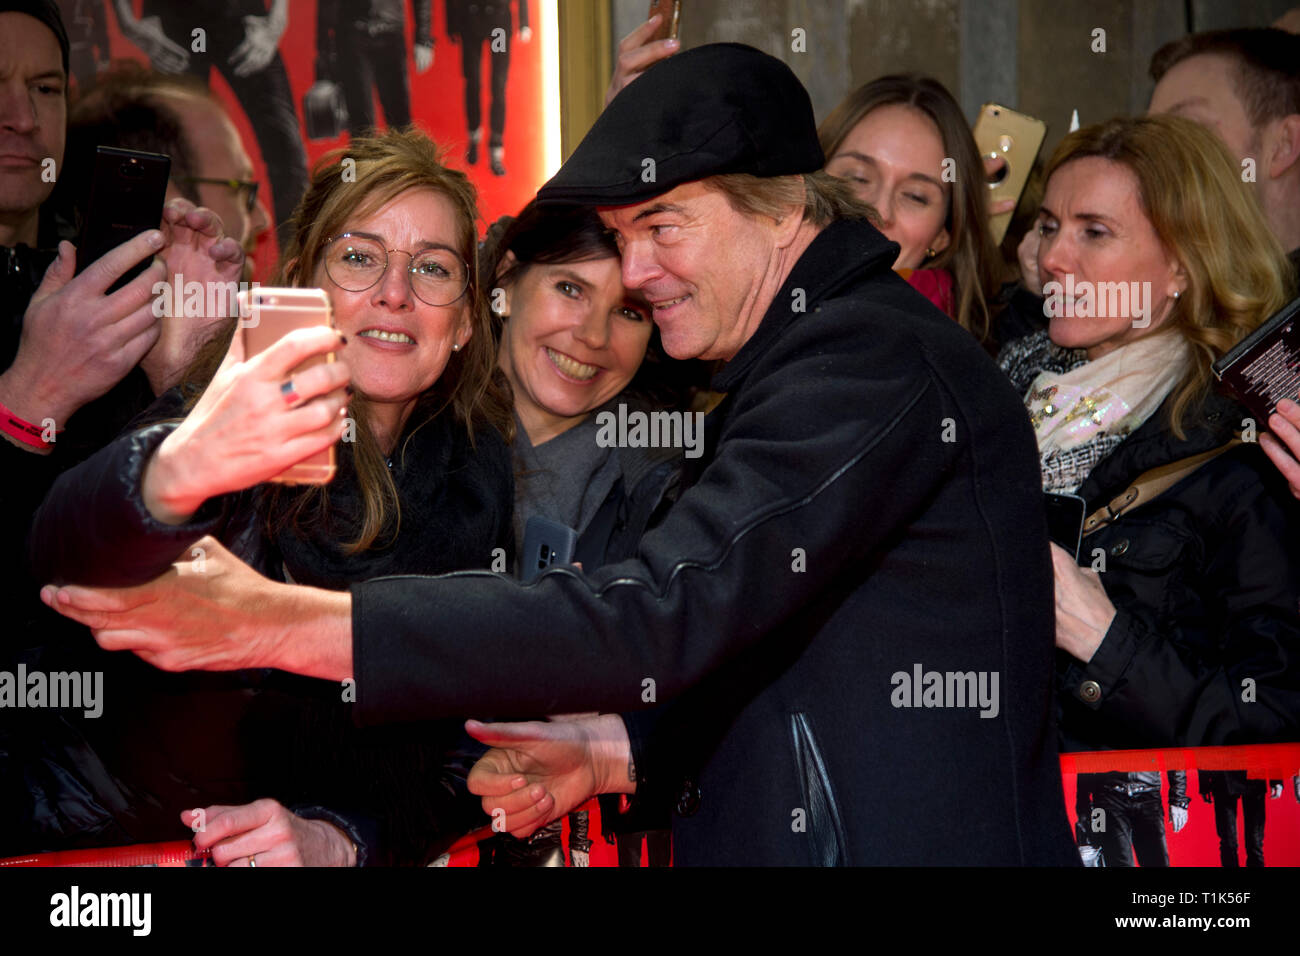 Eat, Deutschland. 26th Mar, 2019. CAMPINO, Saenger, takes selfies with  fans, on the Red Carpet, Red Carpet Show, film premiere 